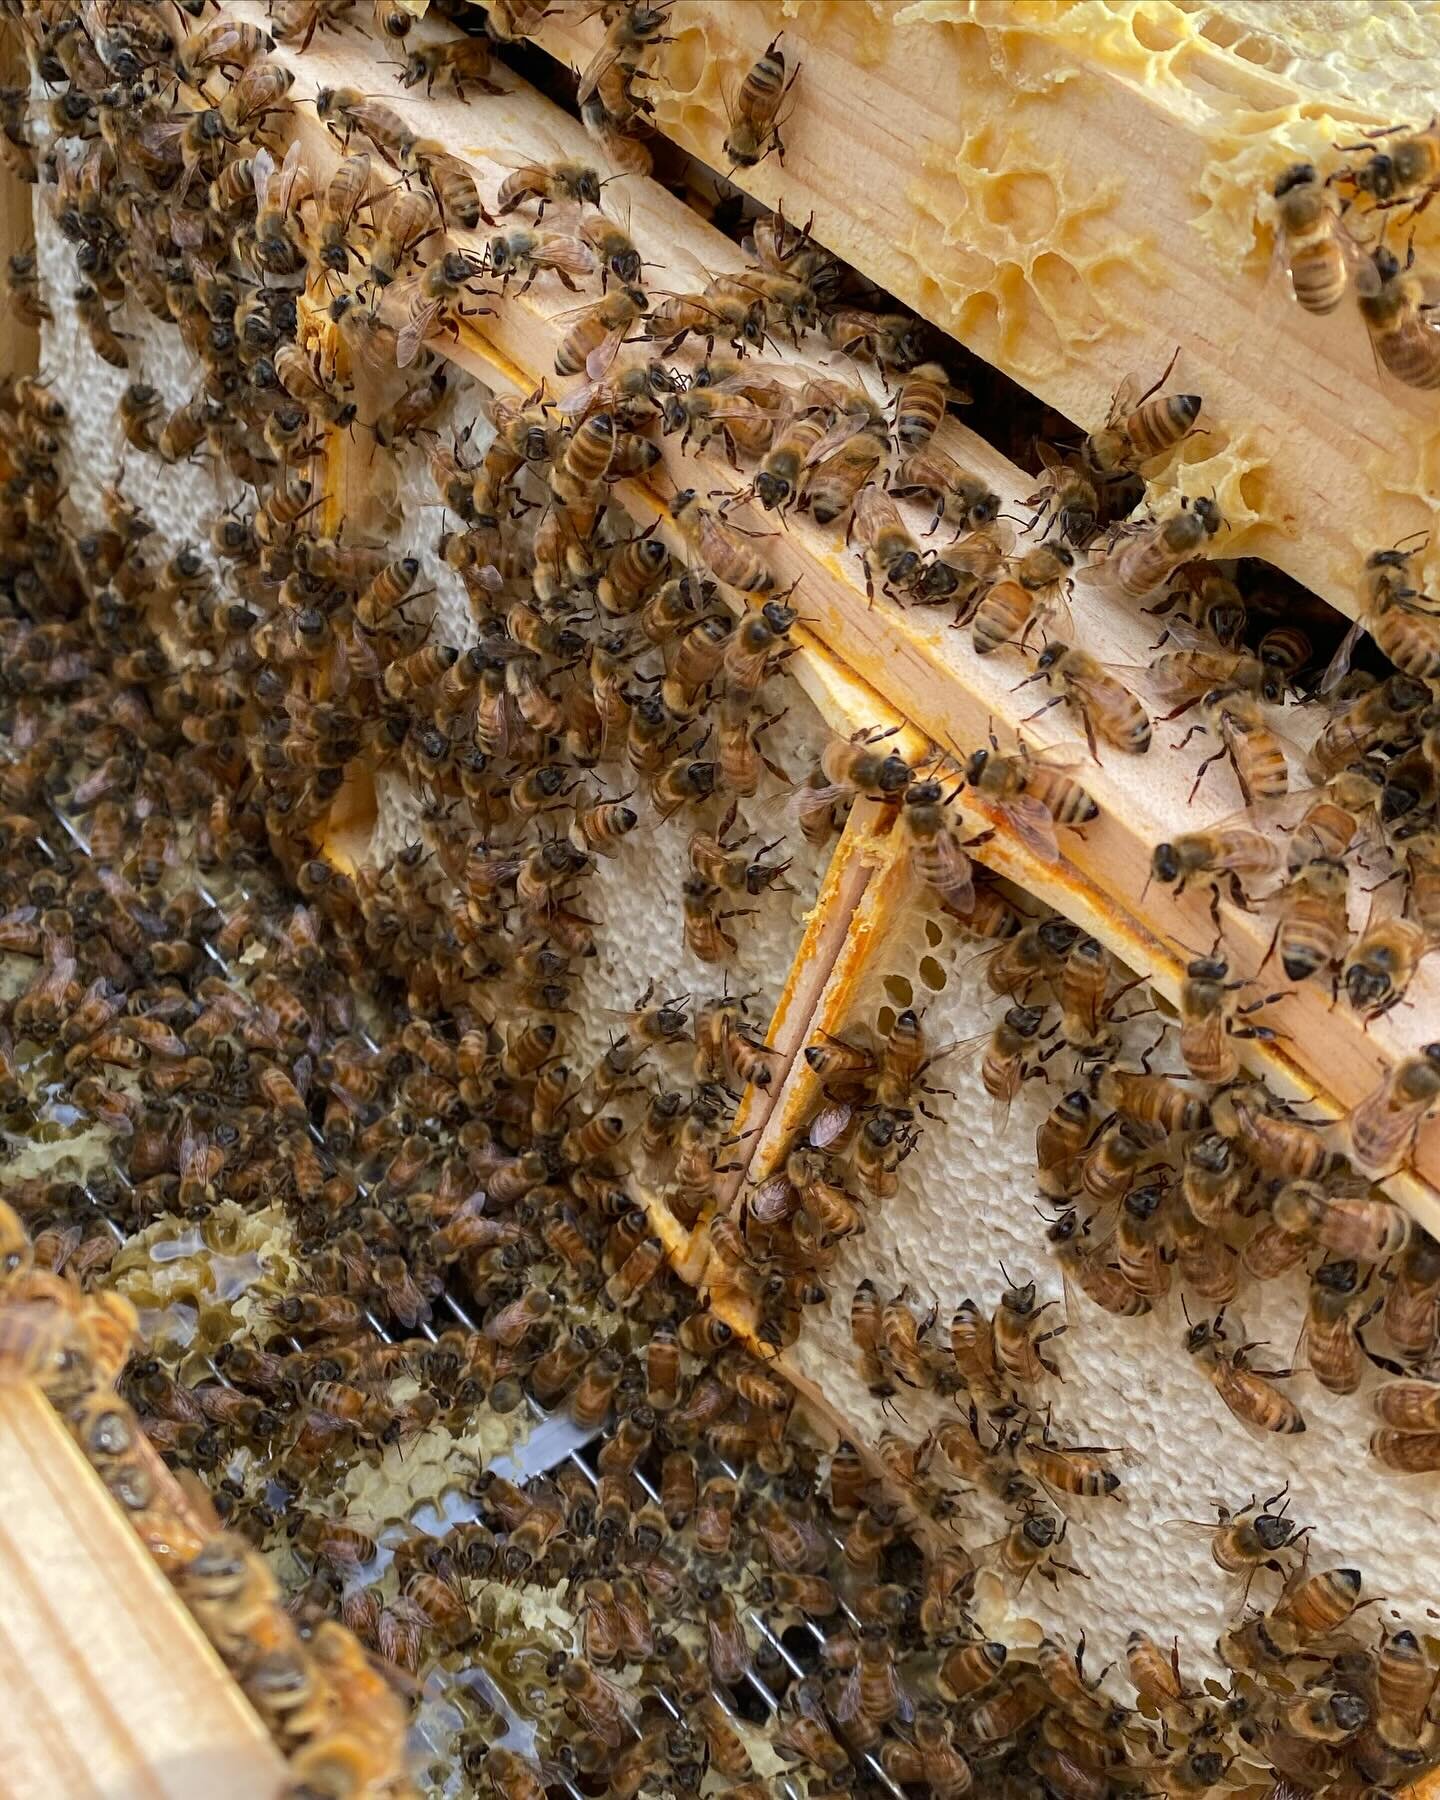 Comb honey squares are on the hives and the bees are working very hard to craft these masterpieces. Who&rsquo;s excited for these to be available again?! 🤩

Comb honey is harder to produce. We have to get our timing of putting the squares in the hiv